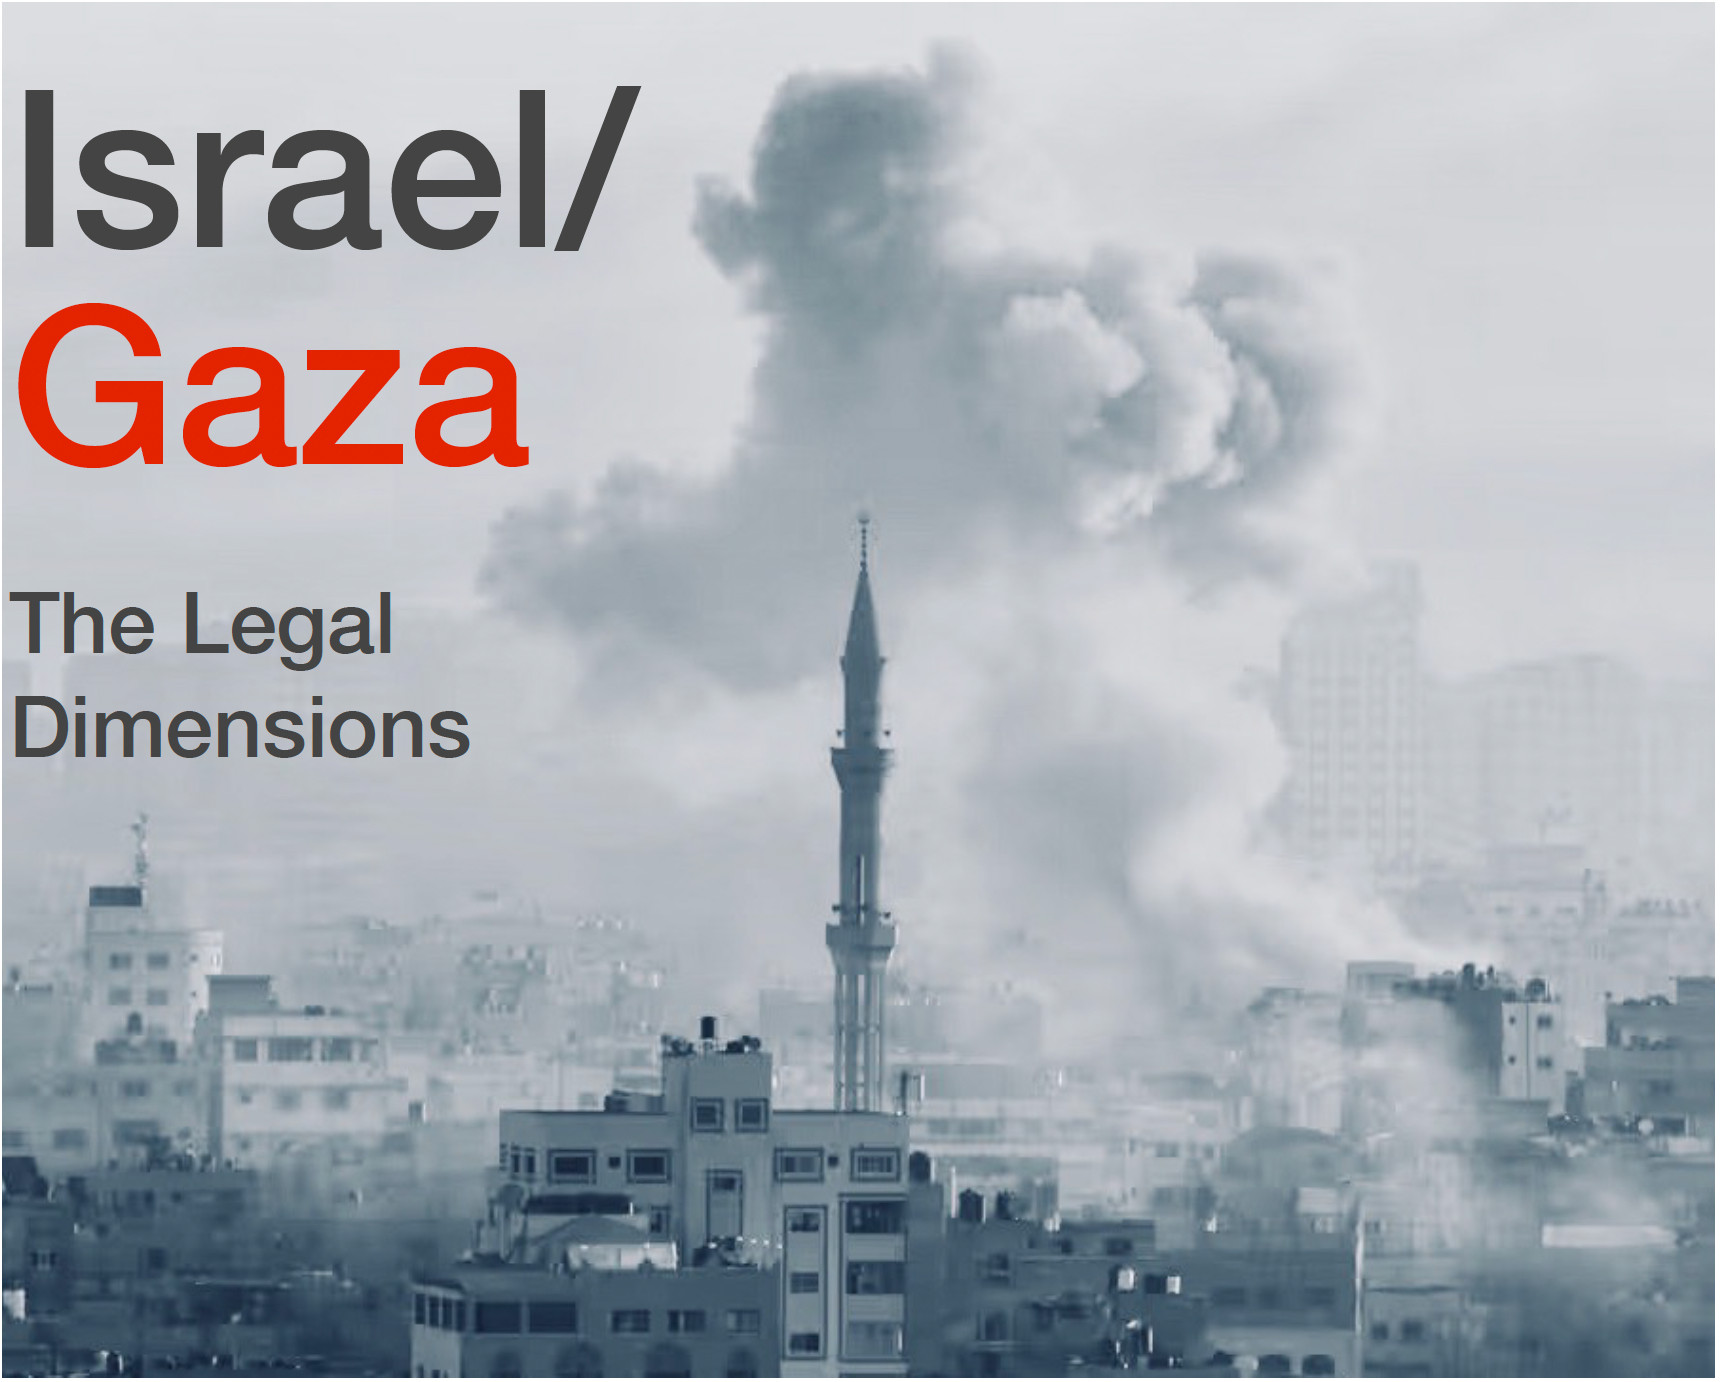 The Israeli War on Gaza: An Overview of the Legal Dimensions